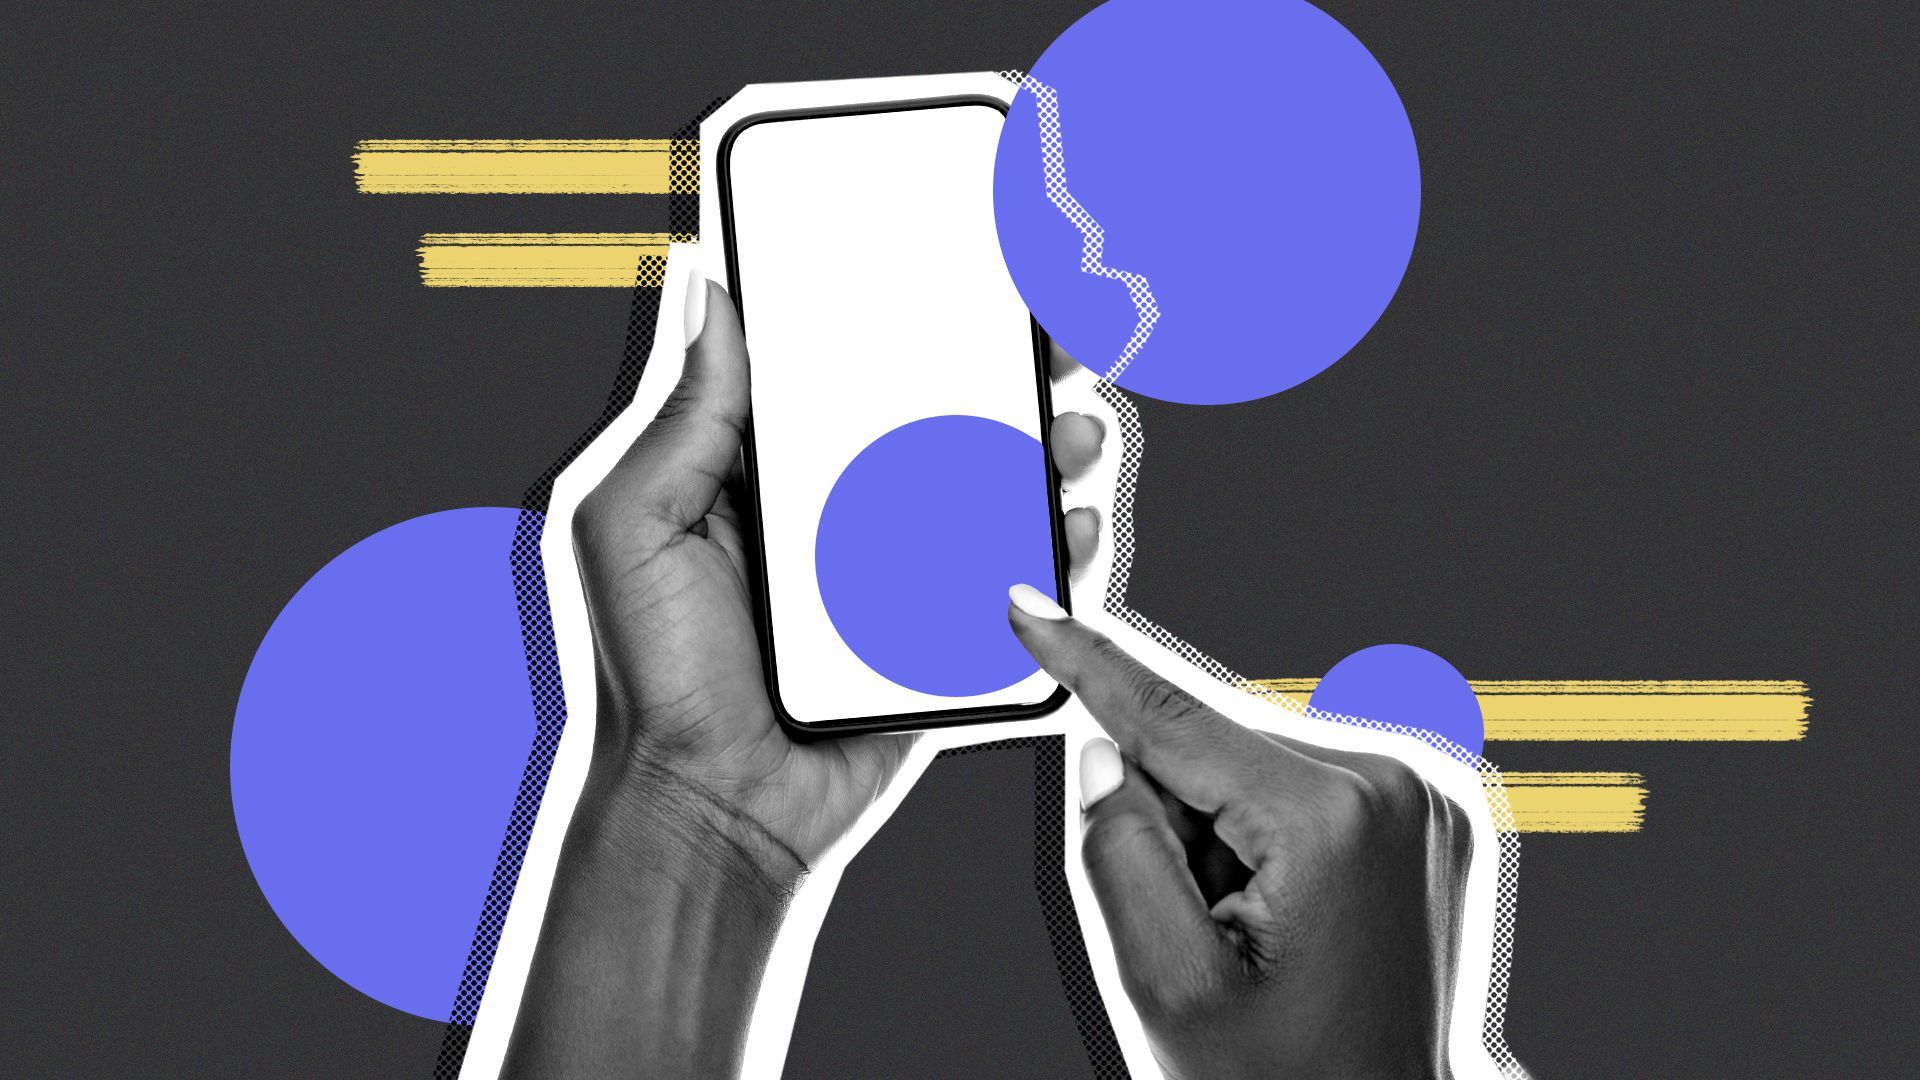 Illustration of hands holding a phone with abstract shapes.